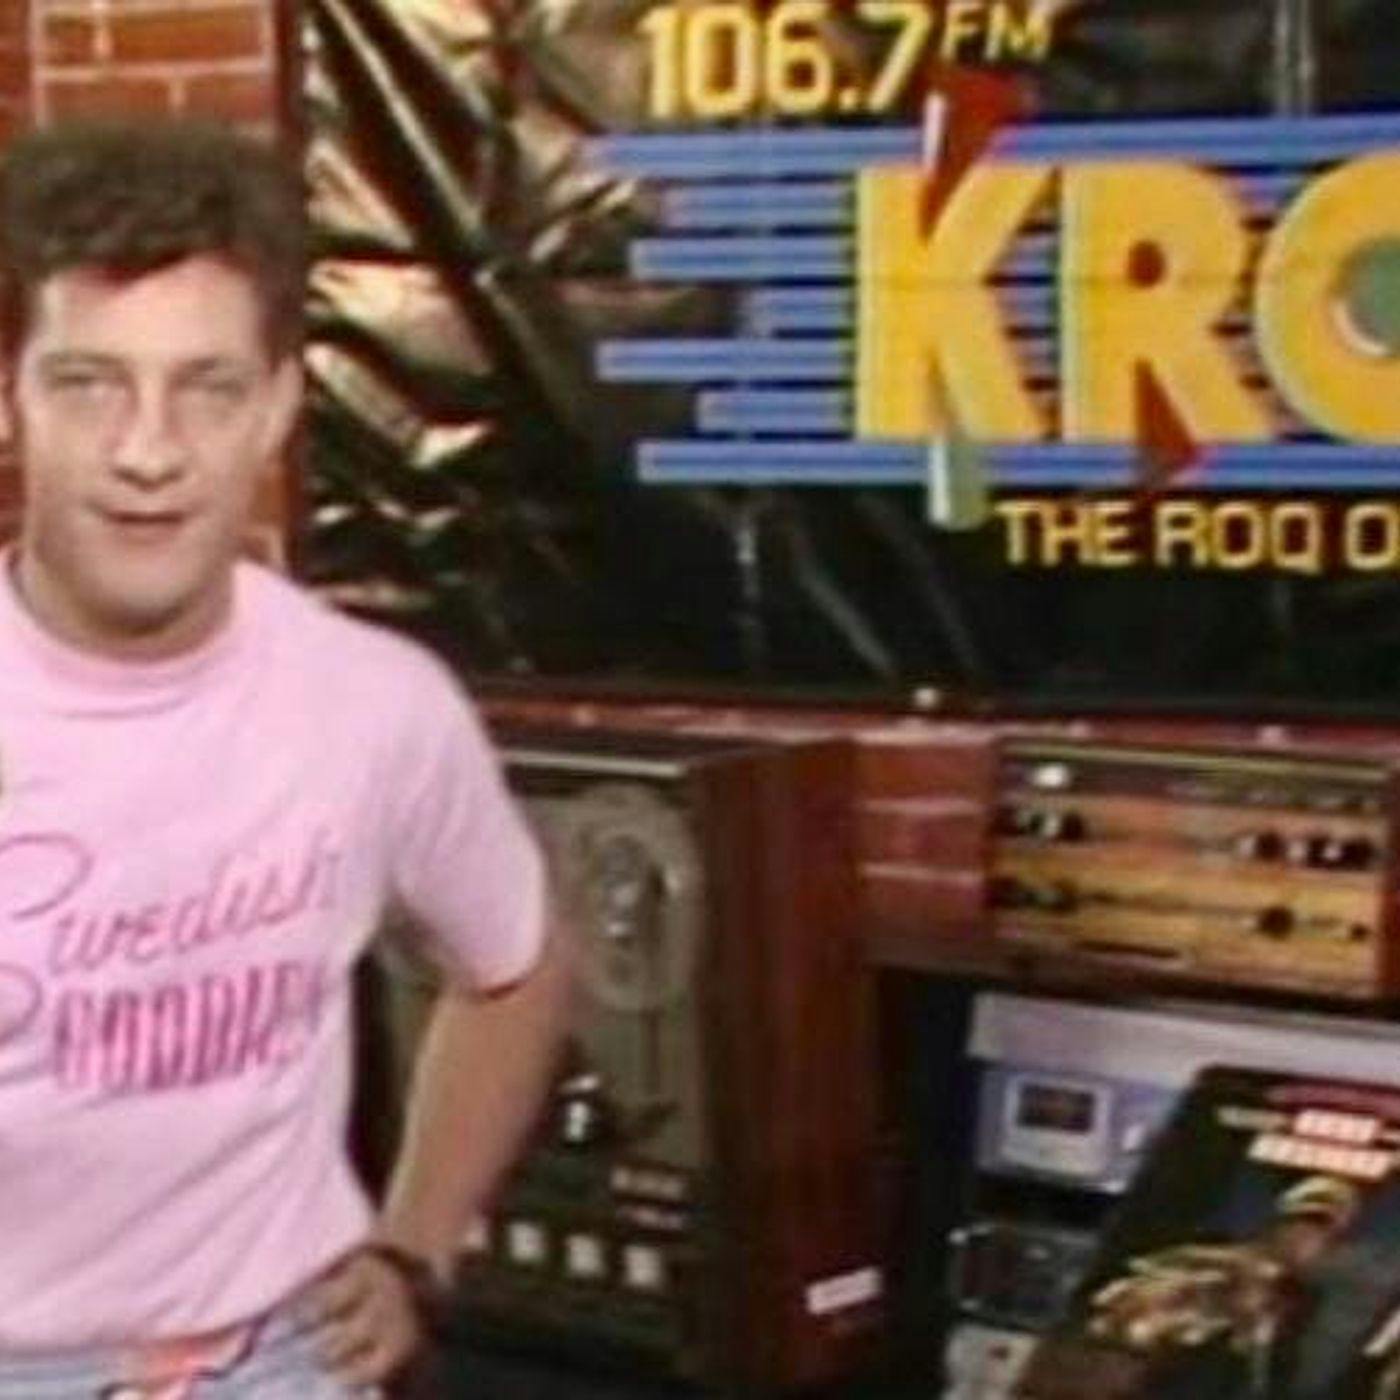 1984 music KROQ songs  106.7 to 101